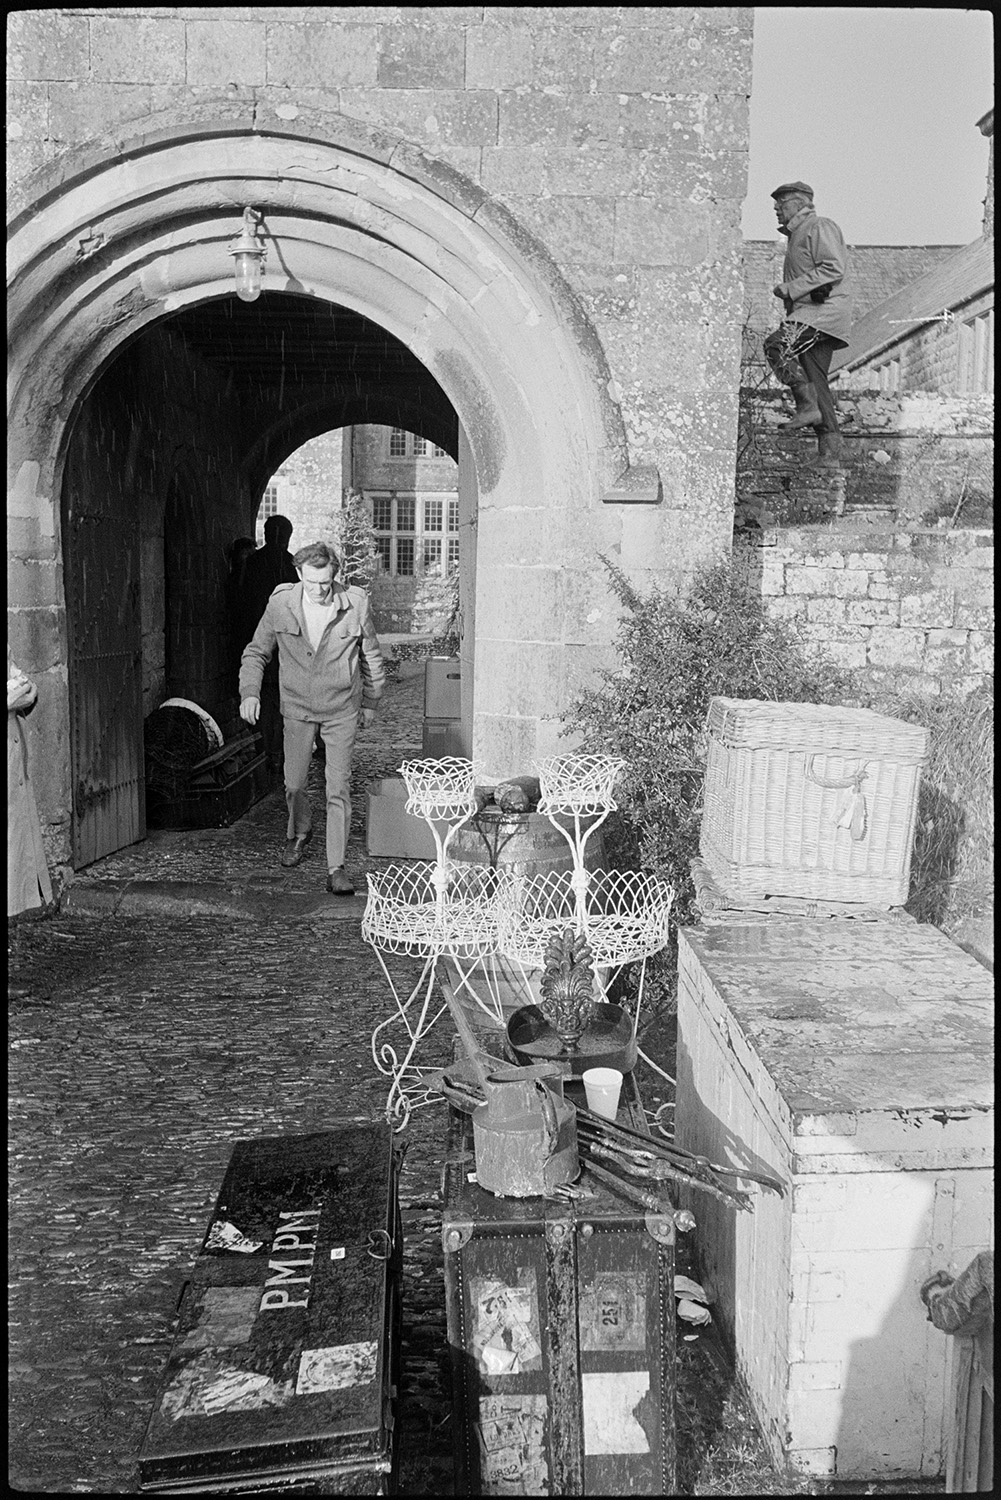 Large house sale, people looking at sale goods, watching bidding, panelled room, arch.
[Items put outside on a cobbled pathway for an auction at Colleton Manor, Chulmleigh, including metal chests, metal planters and a wicker chest. A man is walking through a stone archway, and another man is walking up some stone steps, in the background.]